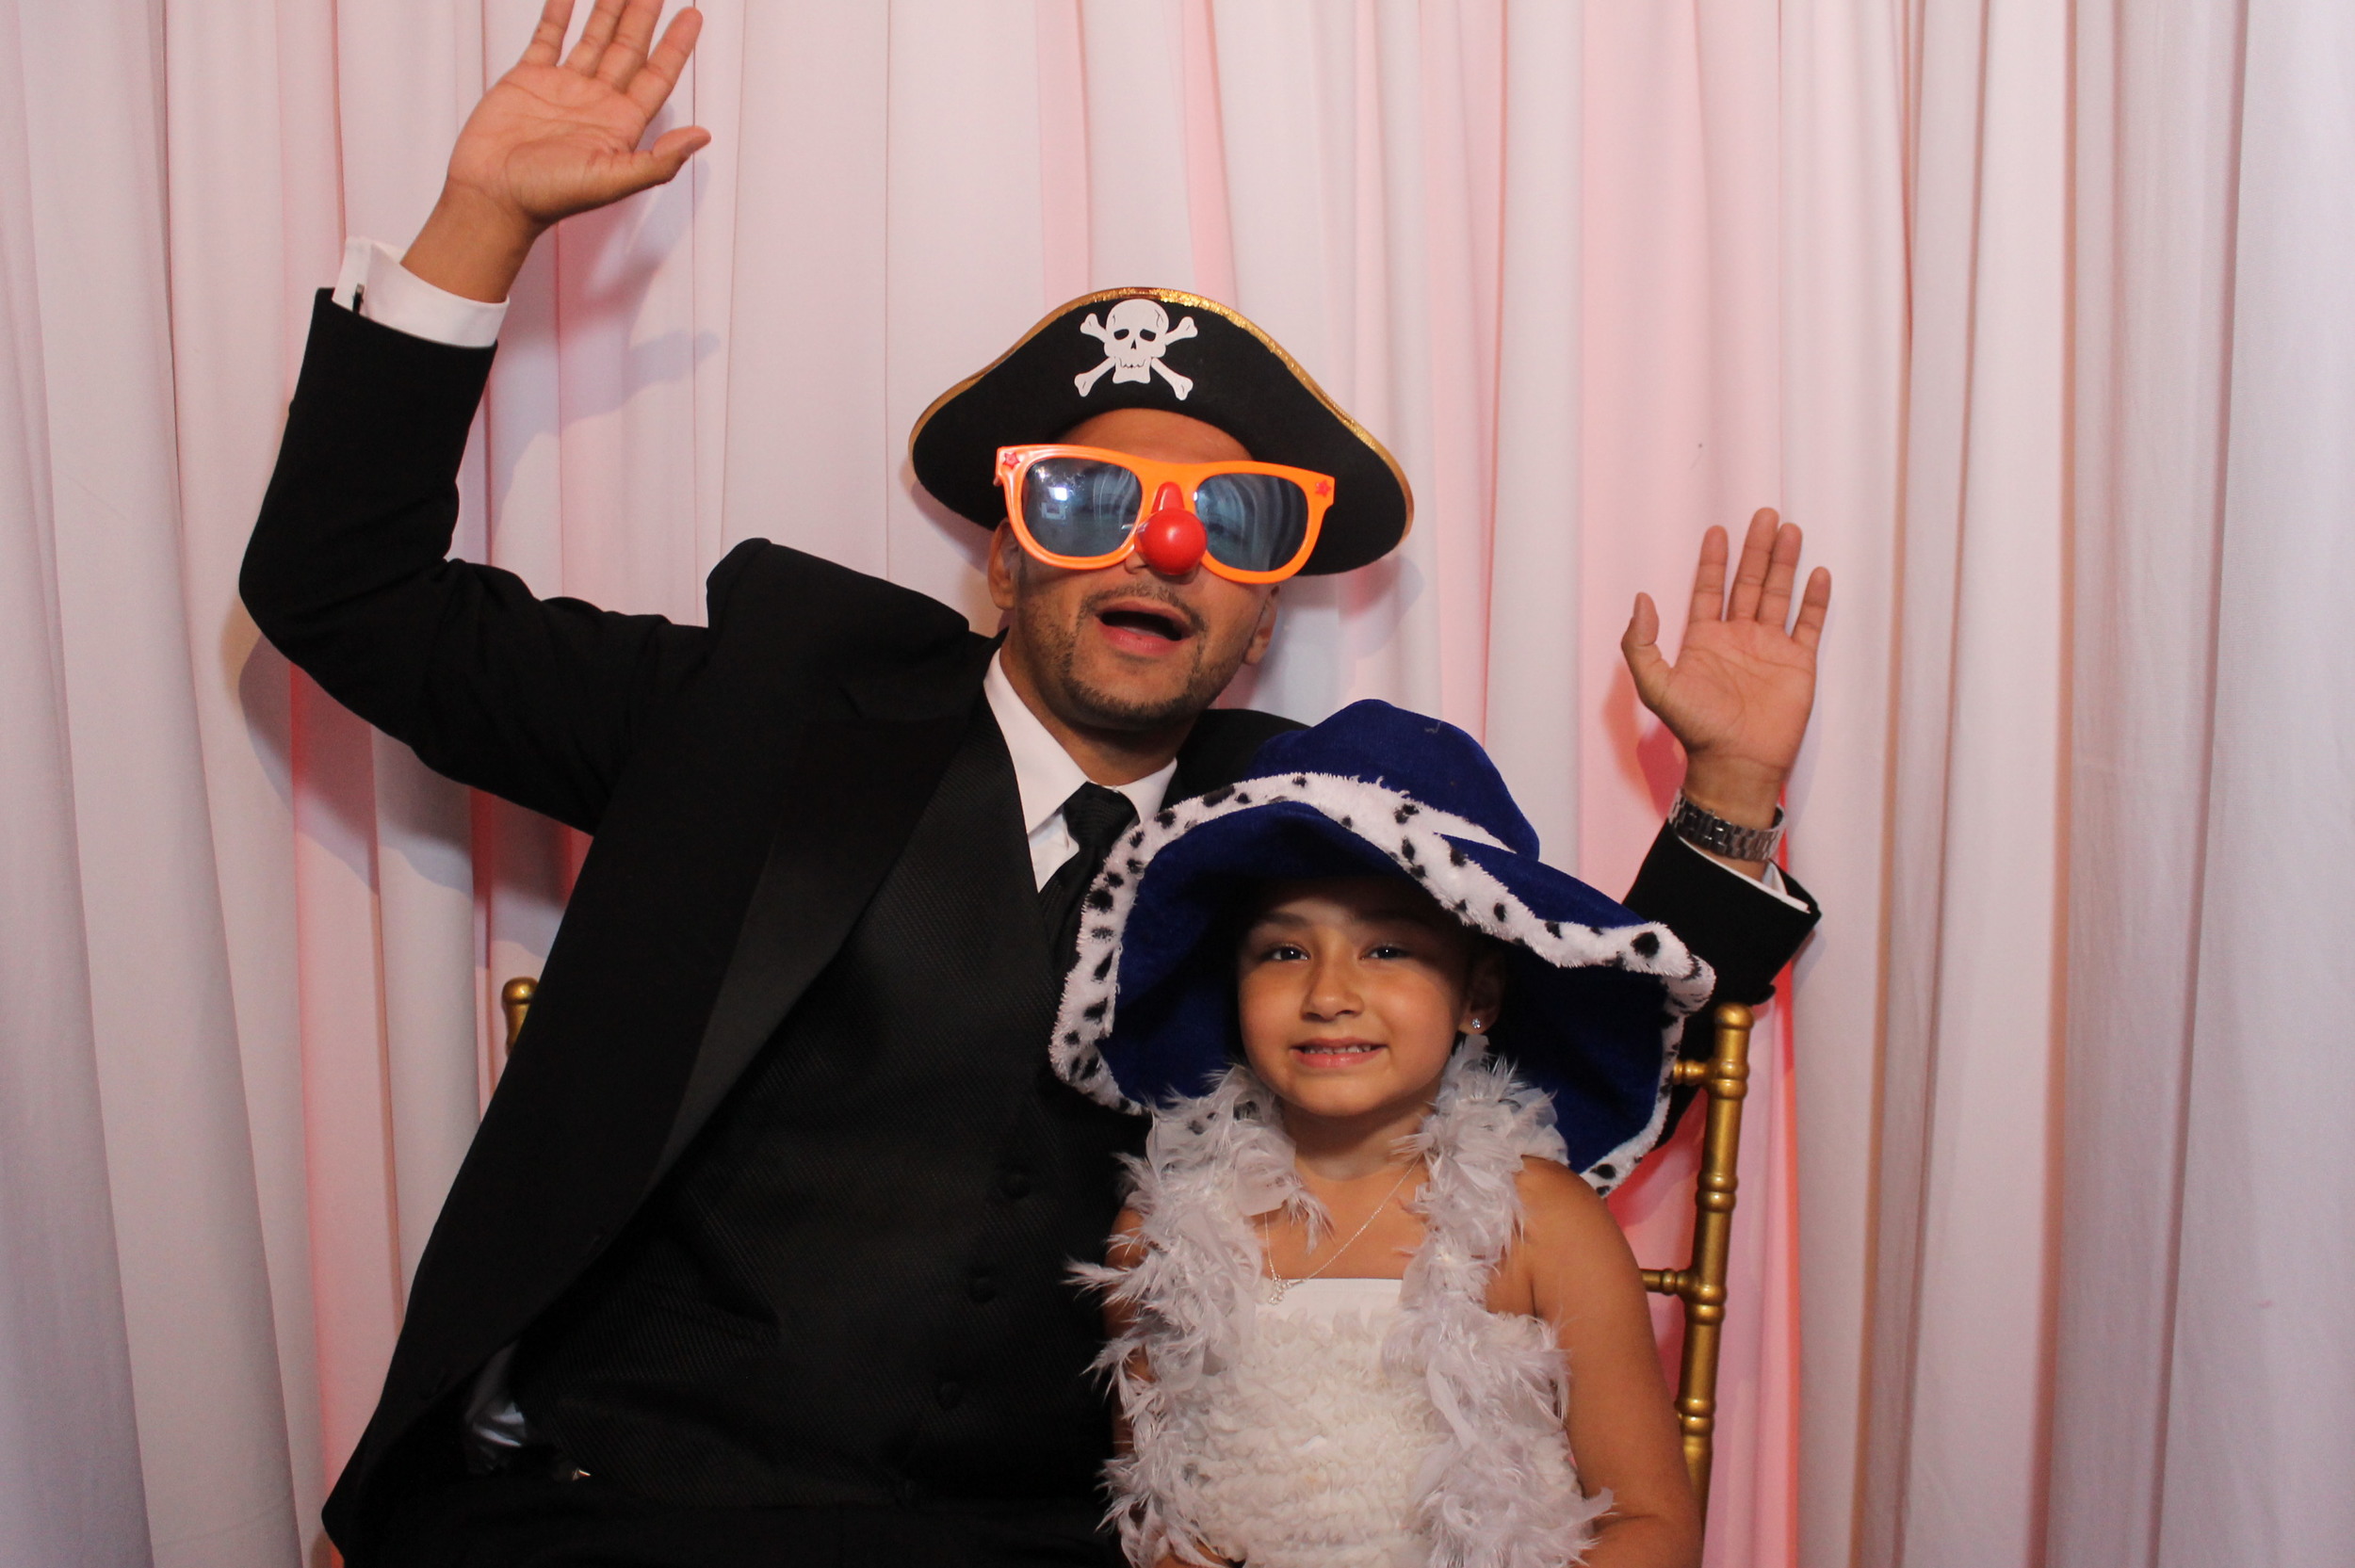 Snapshot Photobooths at The Grove in Cedar Grove, New Jersey